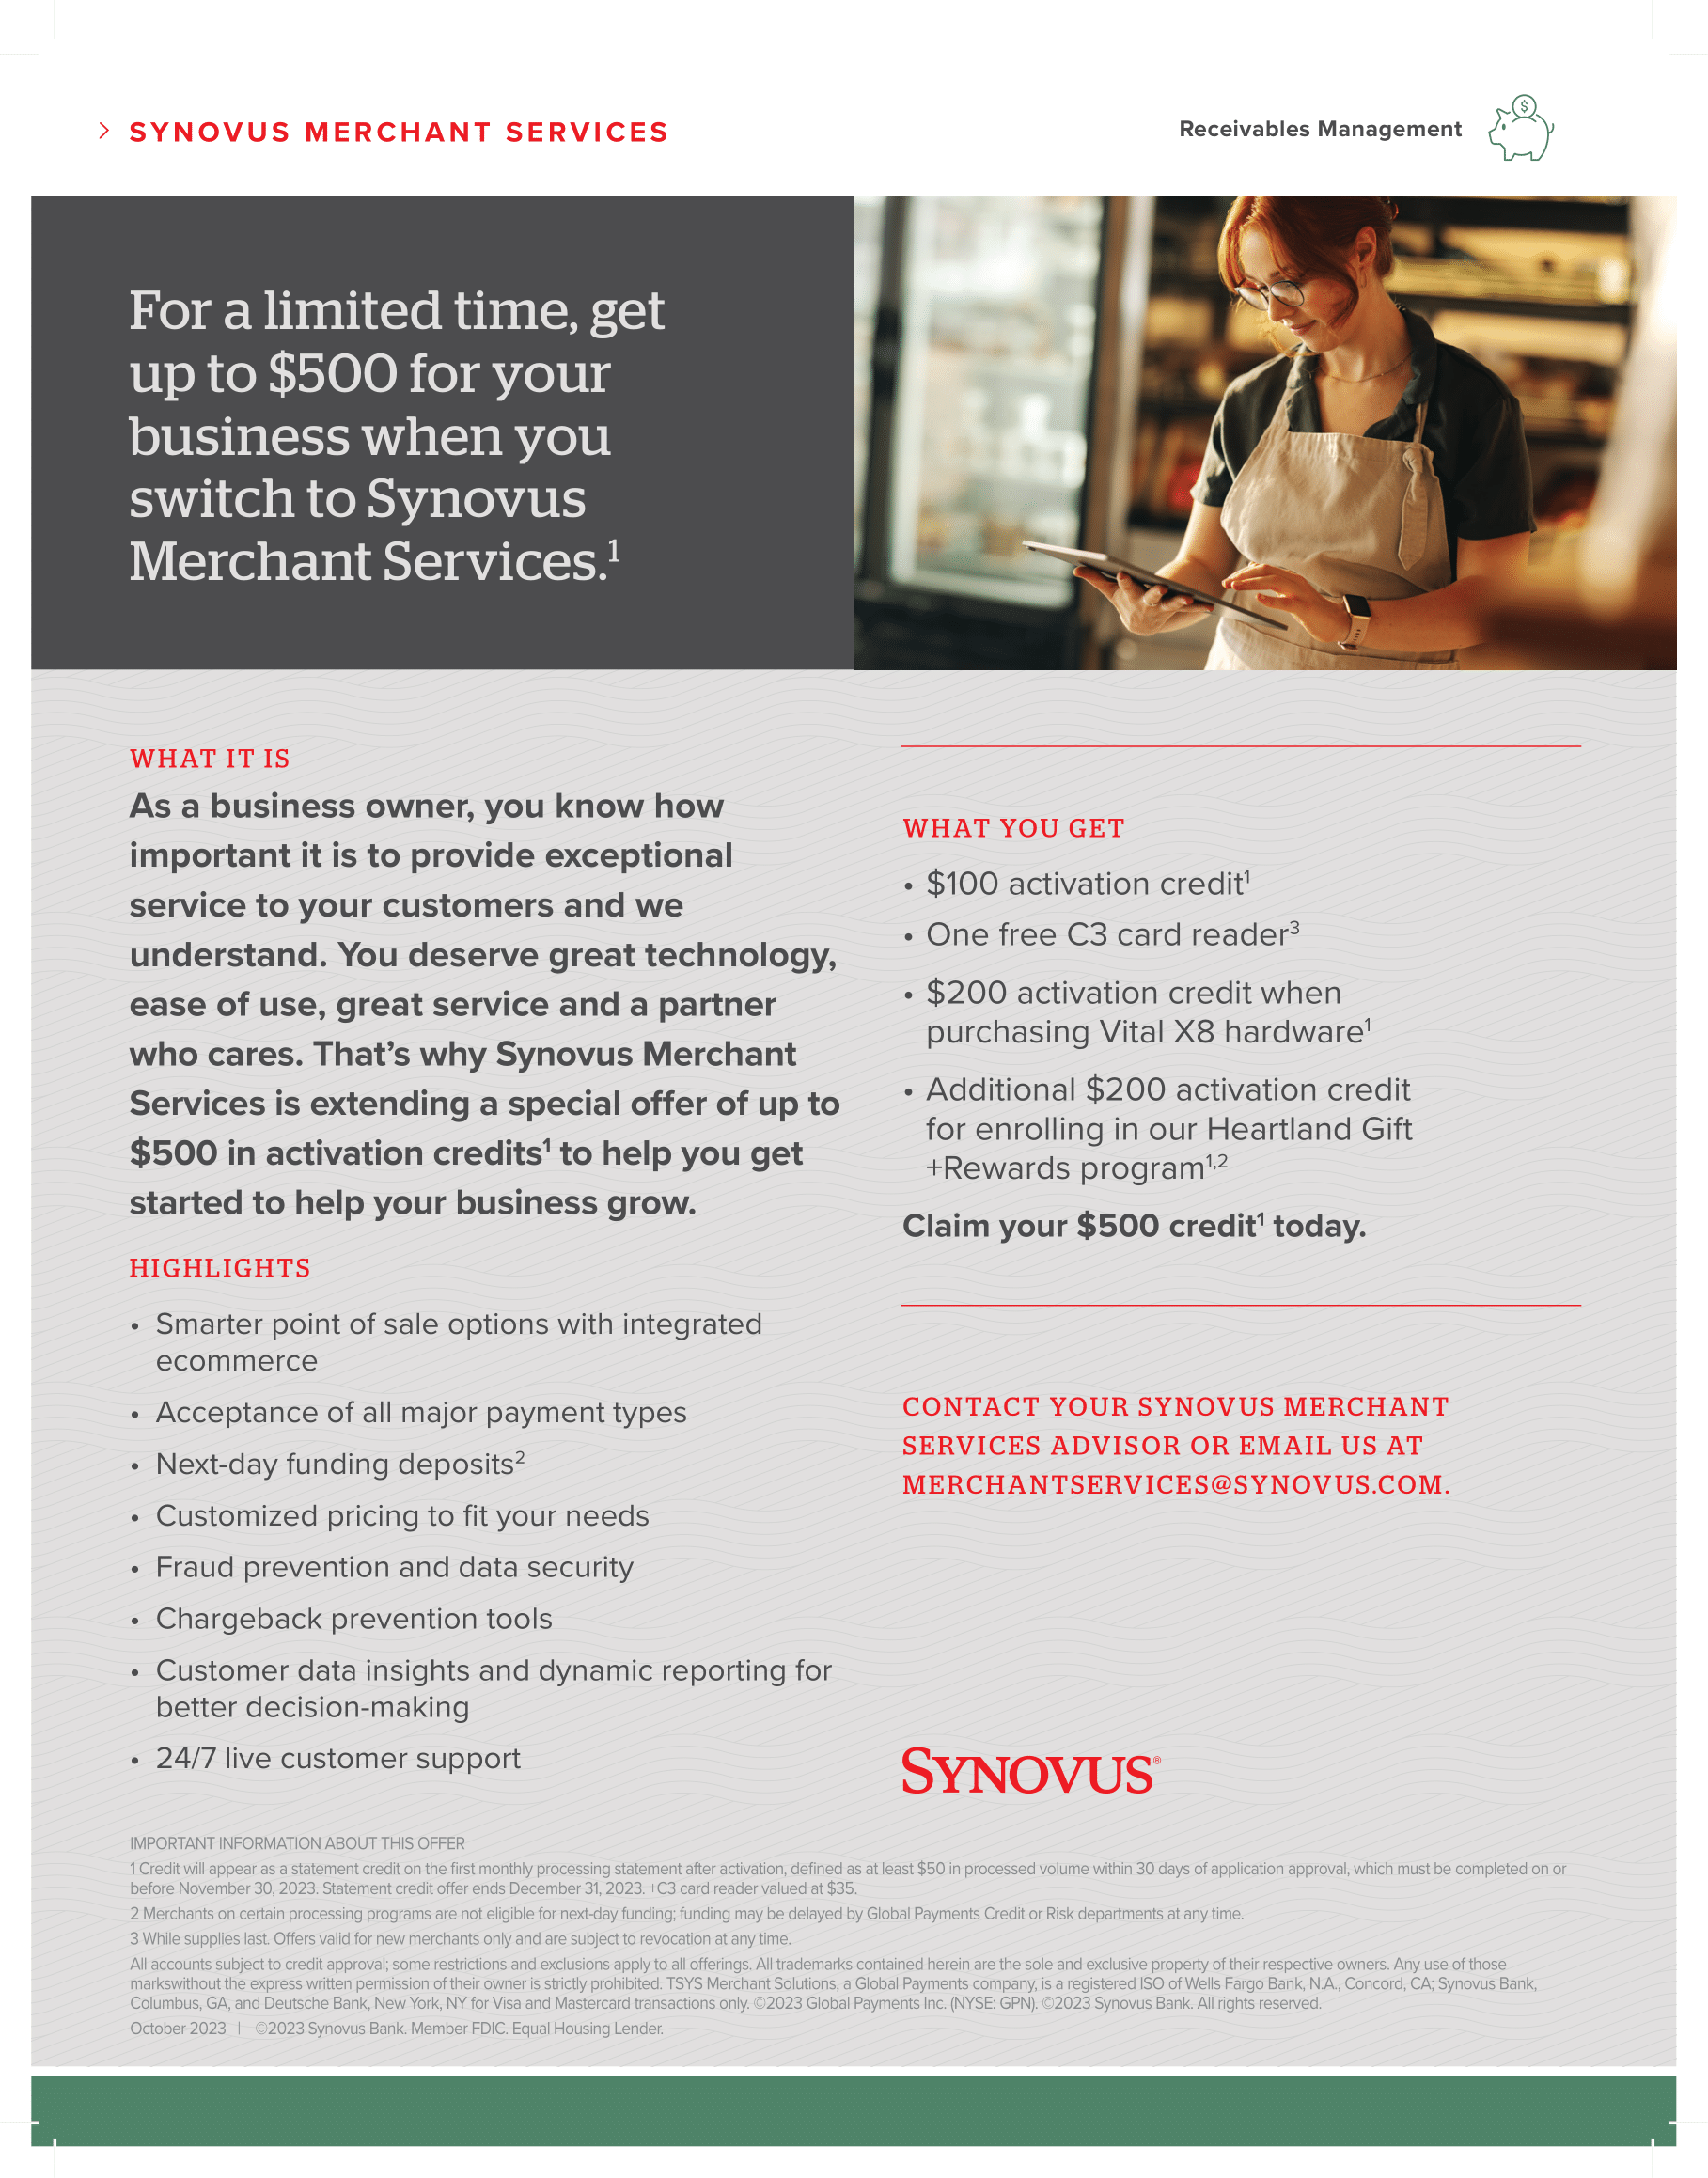 Synovus Bank For a limited time up to $500 for your business